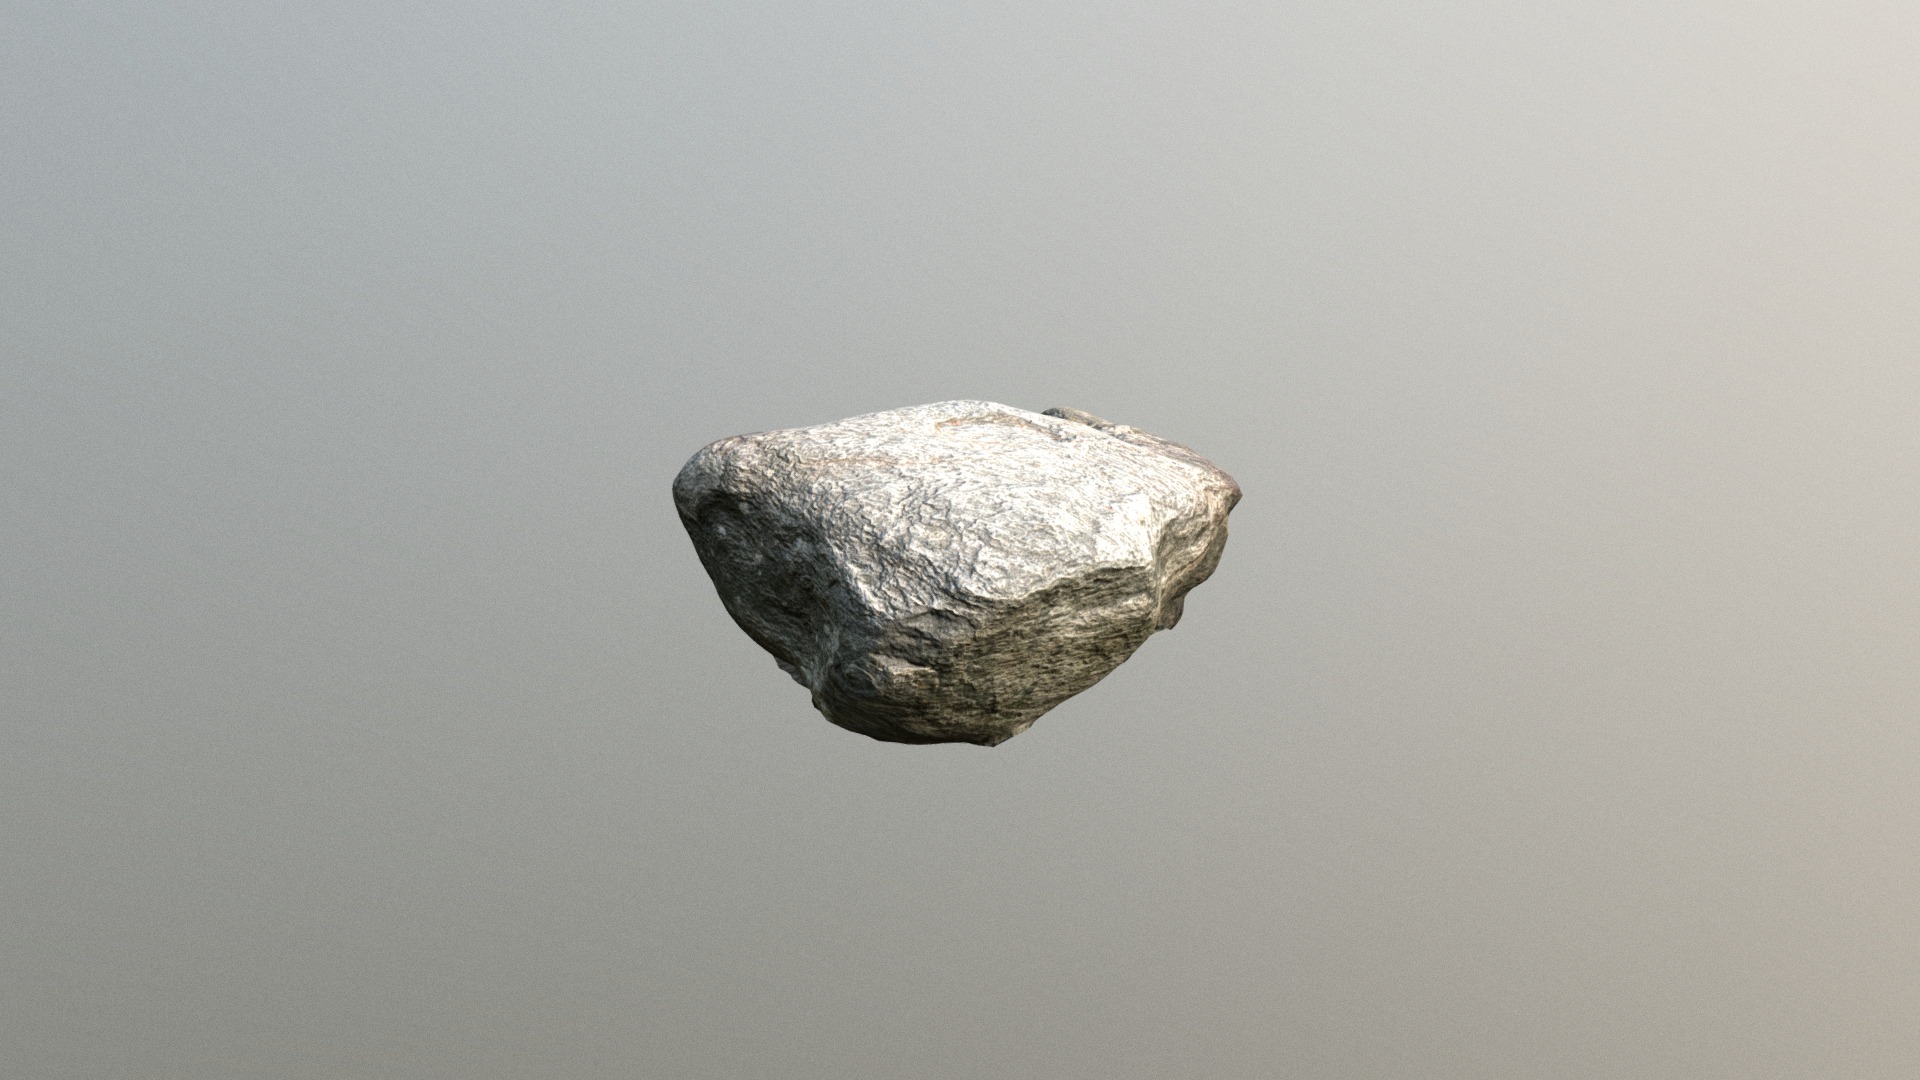 3D model 3D scanned Rock - This is a 3D model of the 3D scanned Rock. The 3D model is about a rock with a white substance on it.